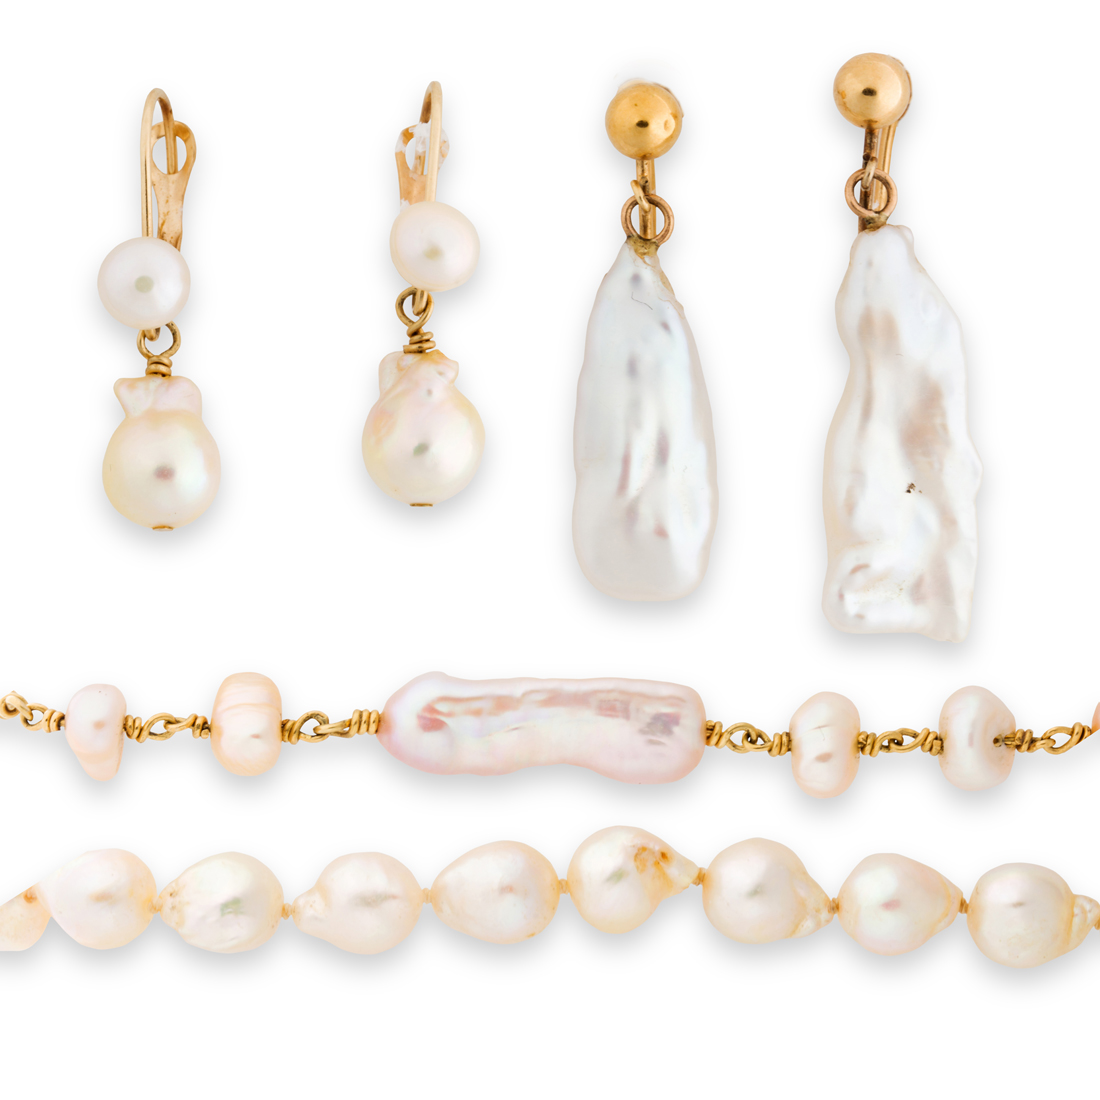 A GROUP OF CULTURED PEARL JEWELRY 3a2857